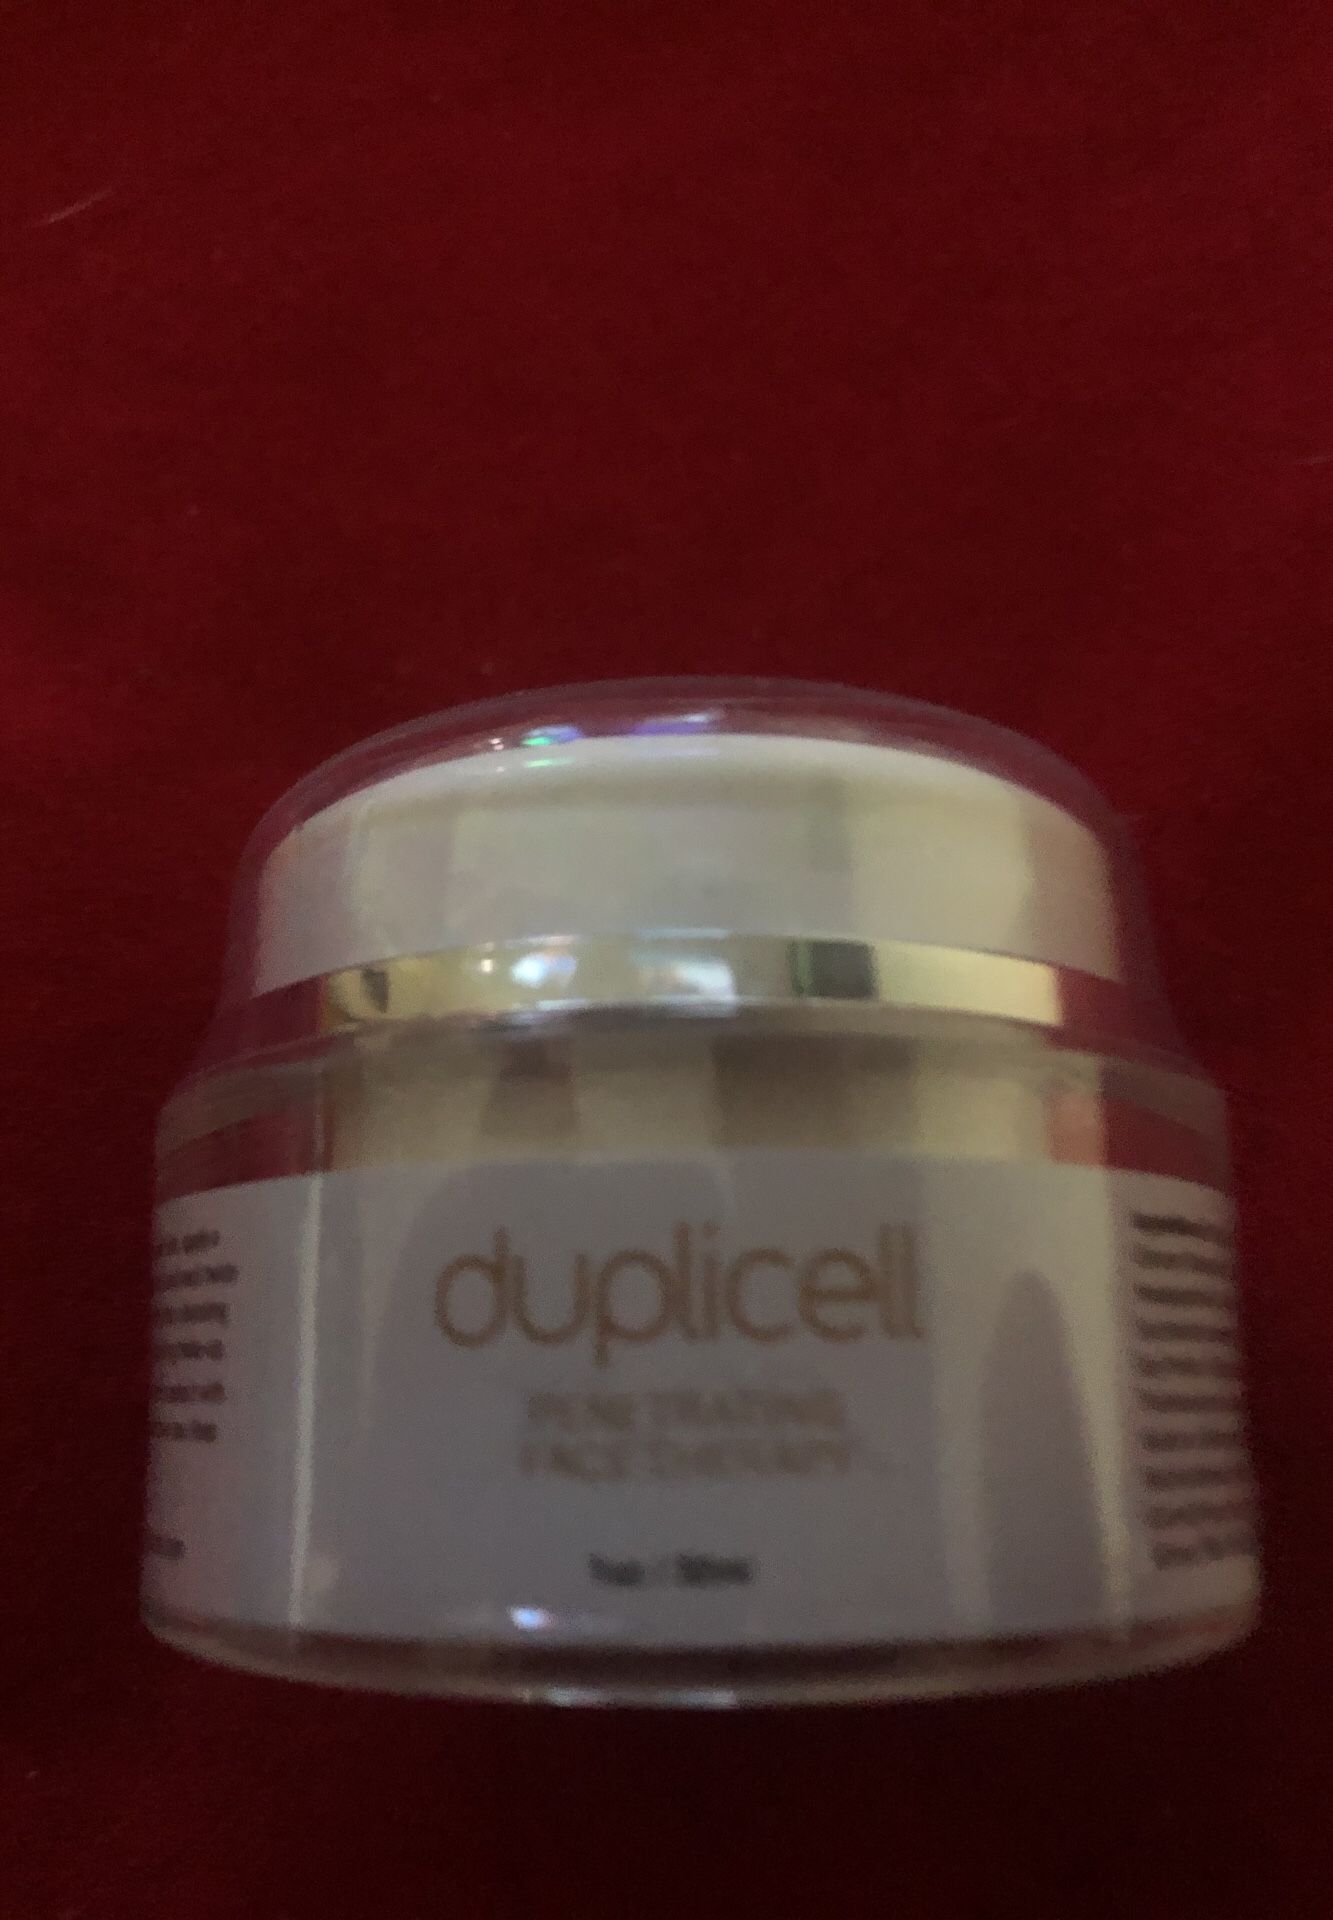 DUPLICELL PENETRATING FACE THERAPY